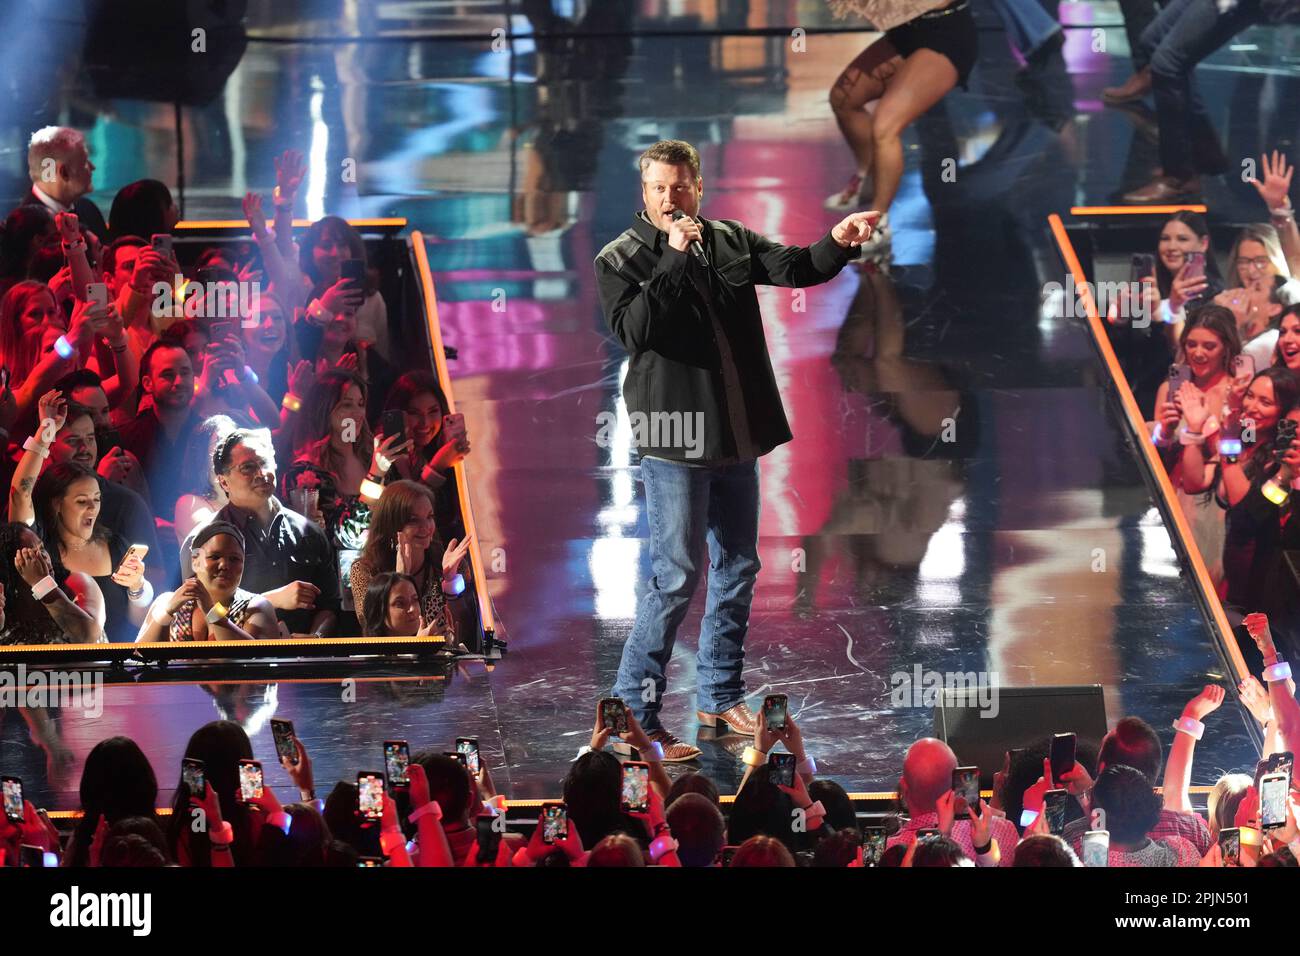 Singer BLAKE SHELTON performs onstage at the 2023 Country Music Television (CMT) Music Awards held for the first time in Austin, Texas on April 2, 2023 at the Moody Center before a sold out crowd. Credit: Bob Daemmrich/Alamy Live News Stock Photo